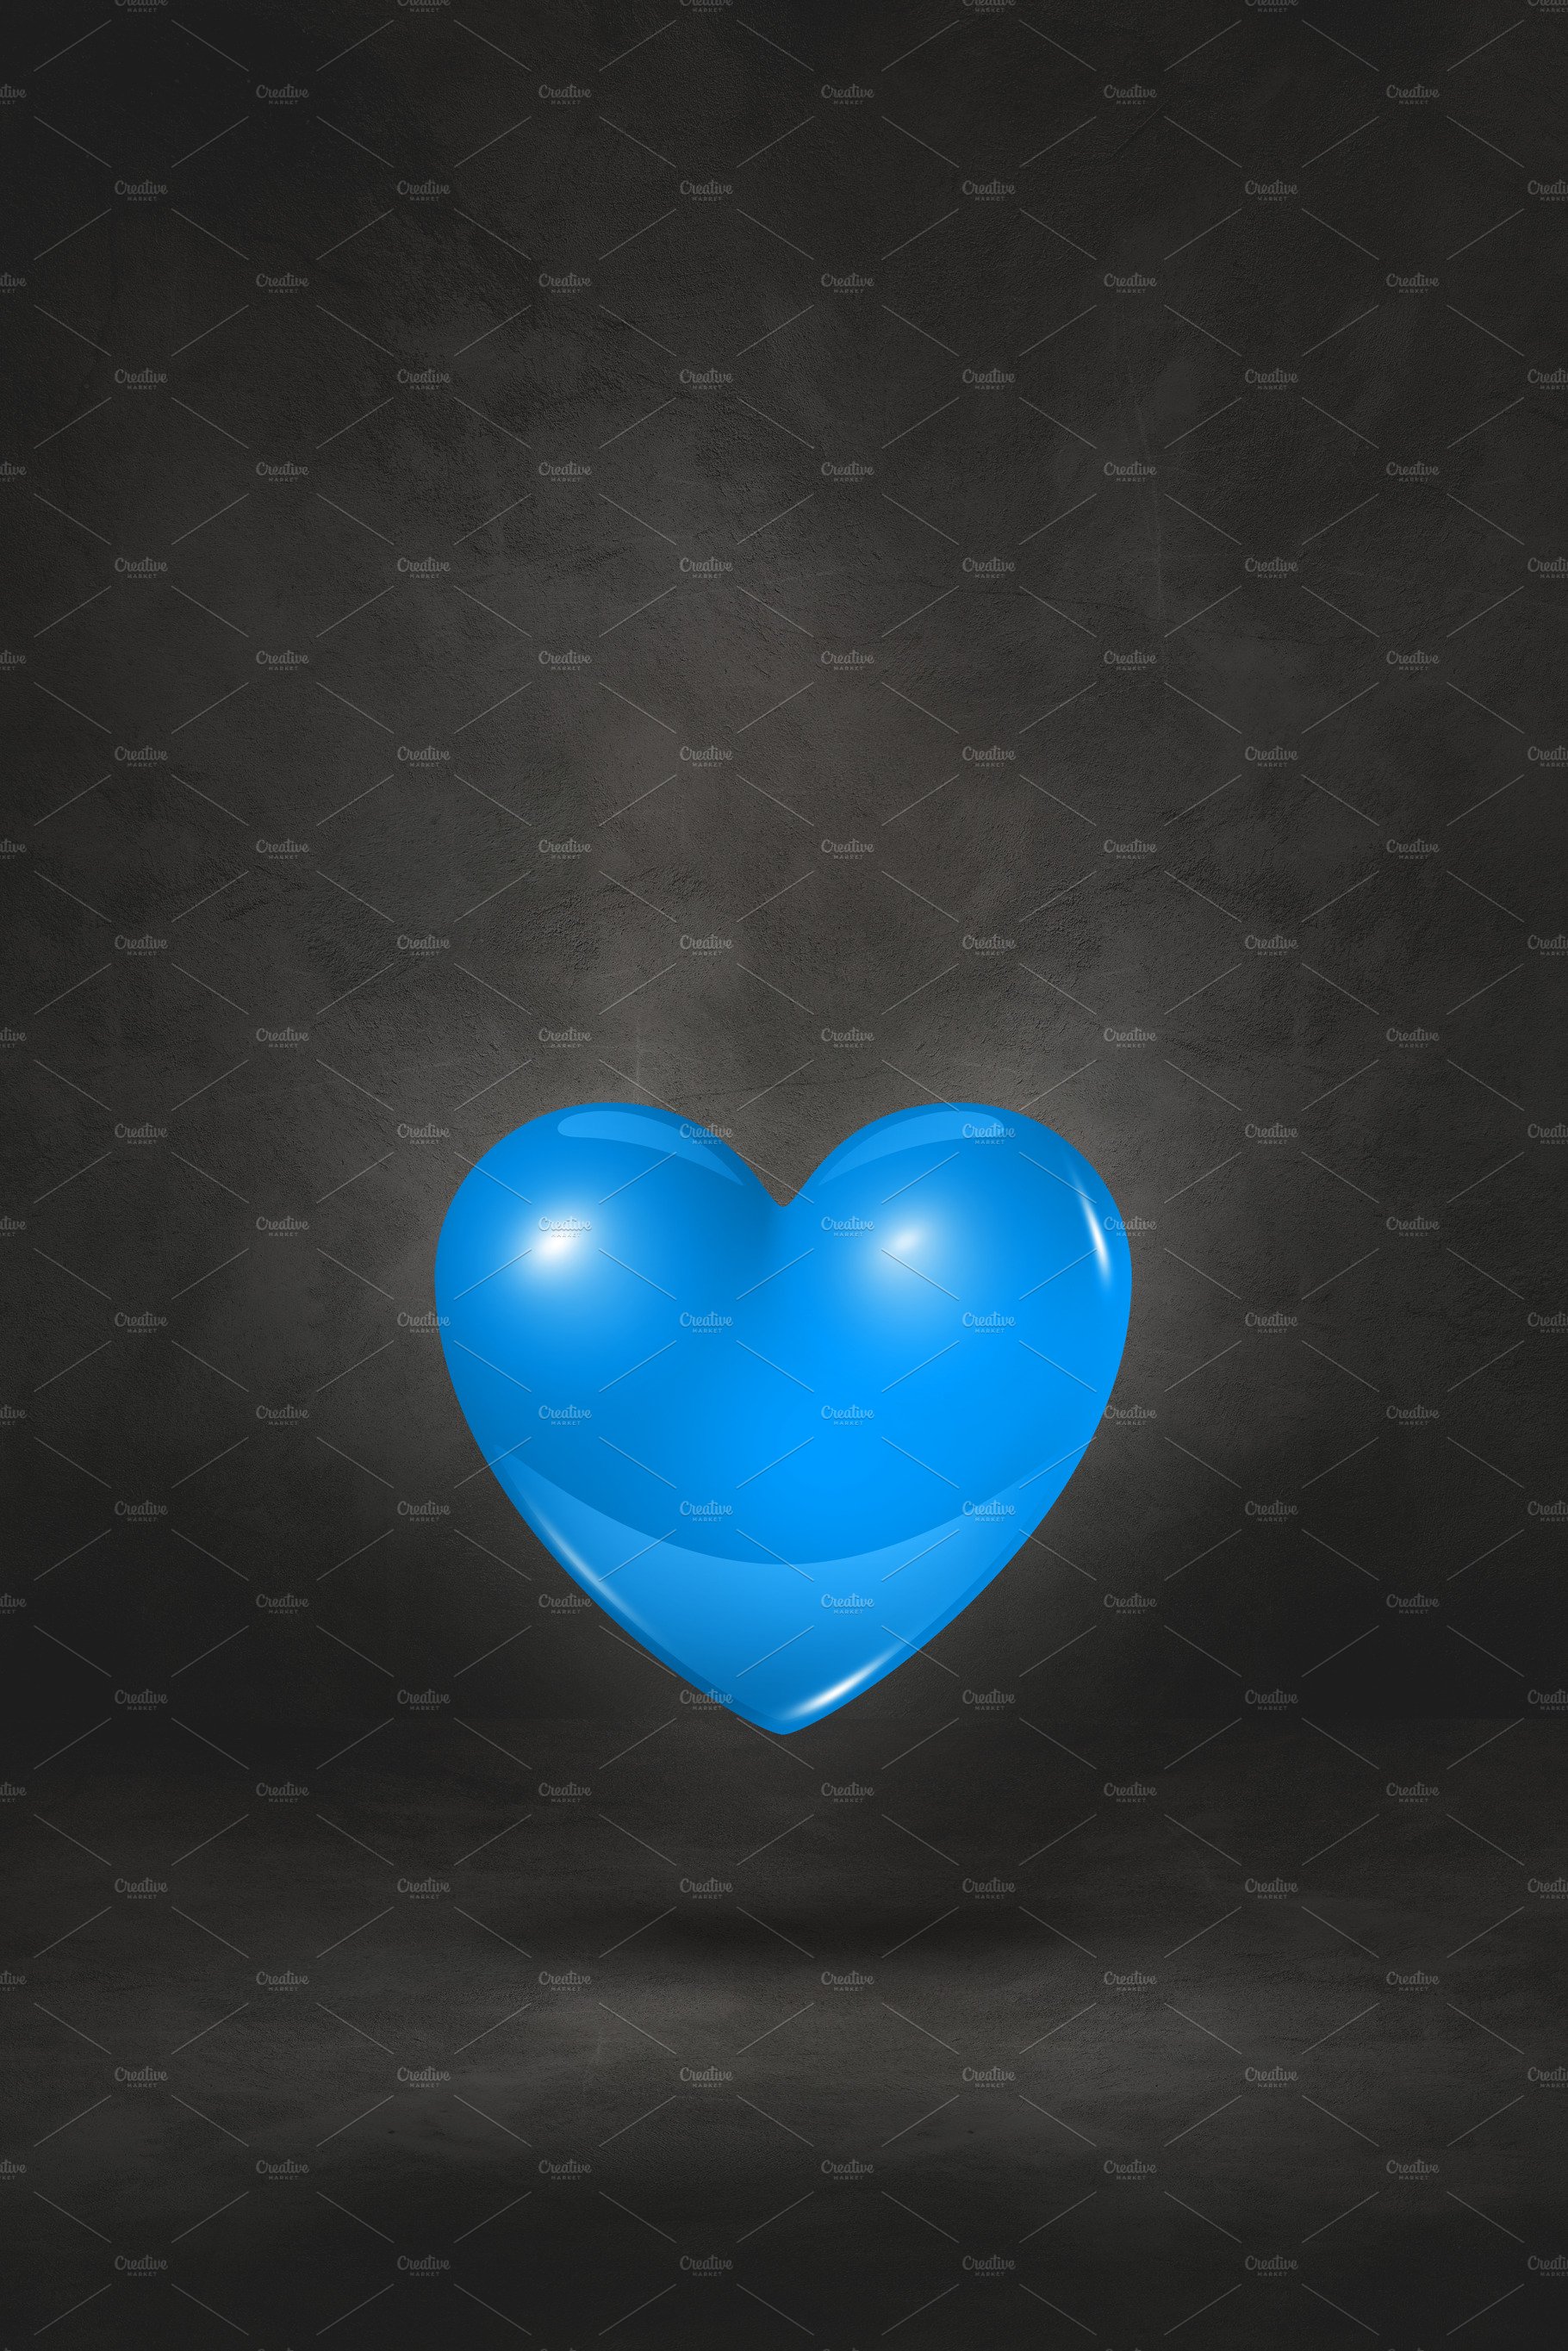 3D blue heart on a black studio background cover image.